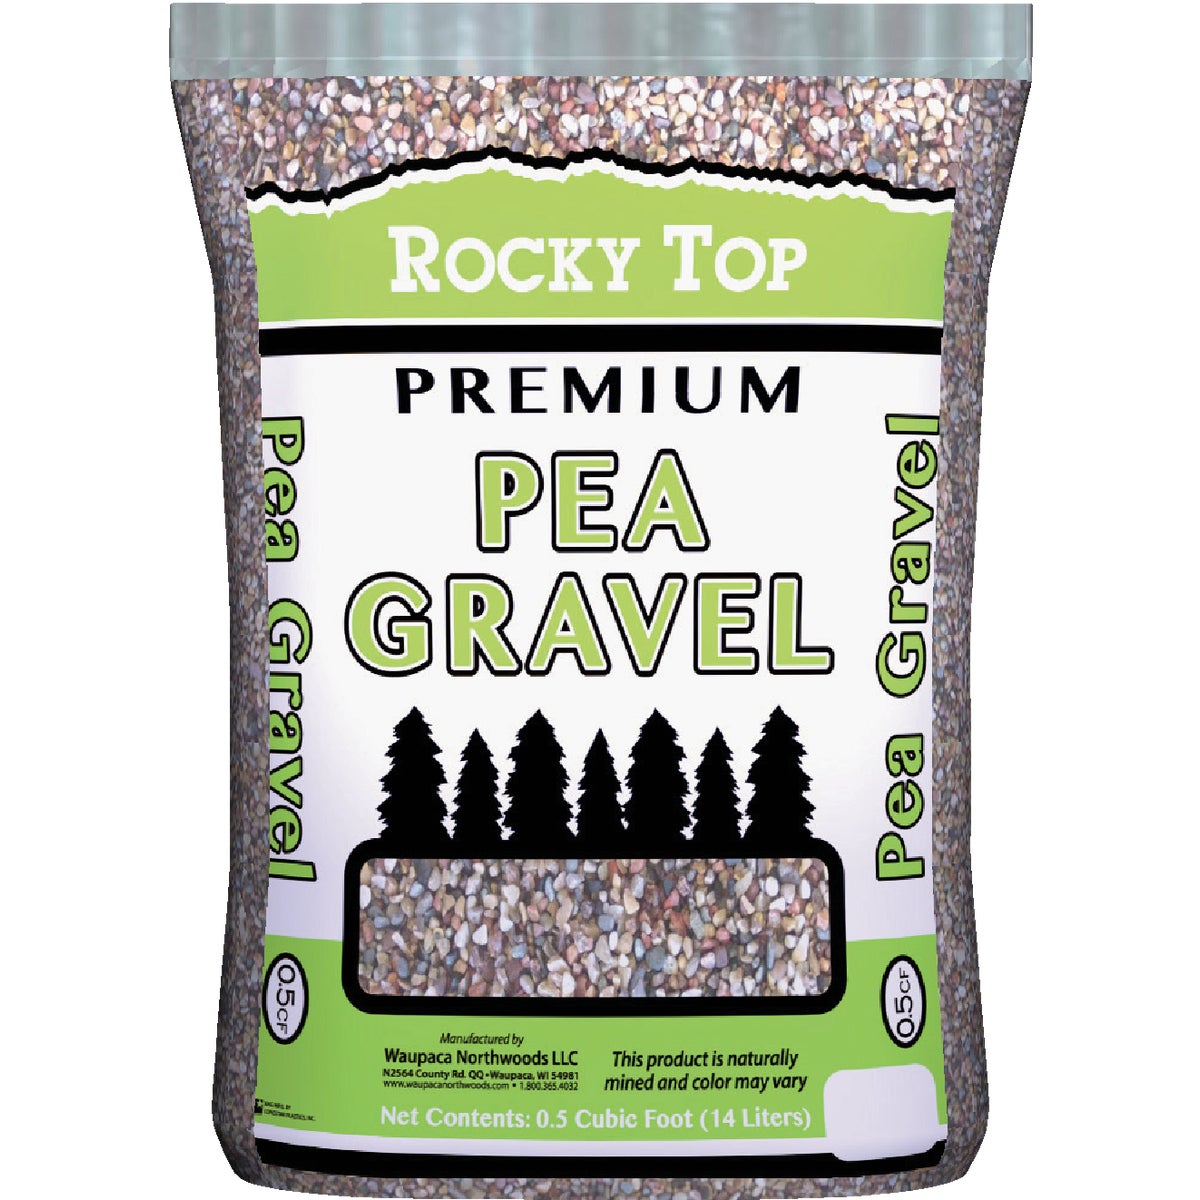 Item 702983, 0.5 cubic foot bag premium pea gravel (weighs approximately 50 pounds).